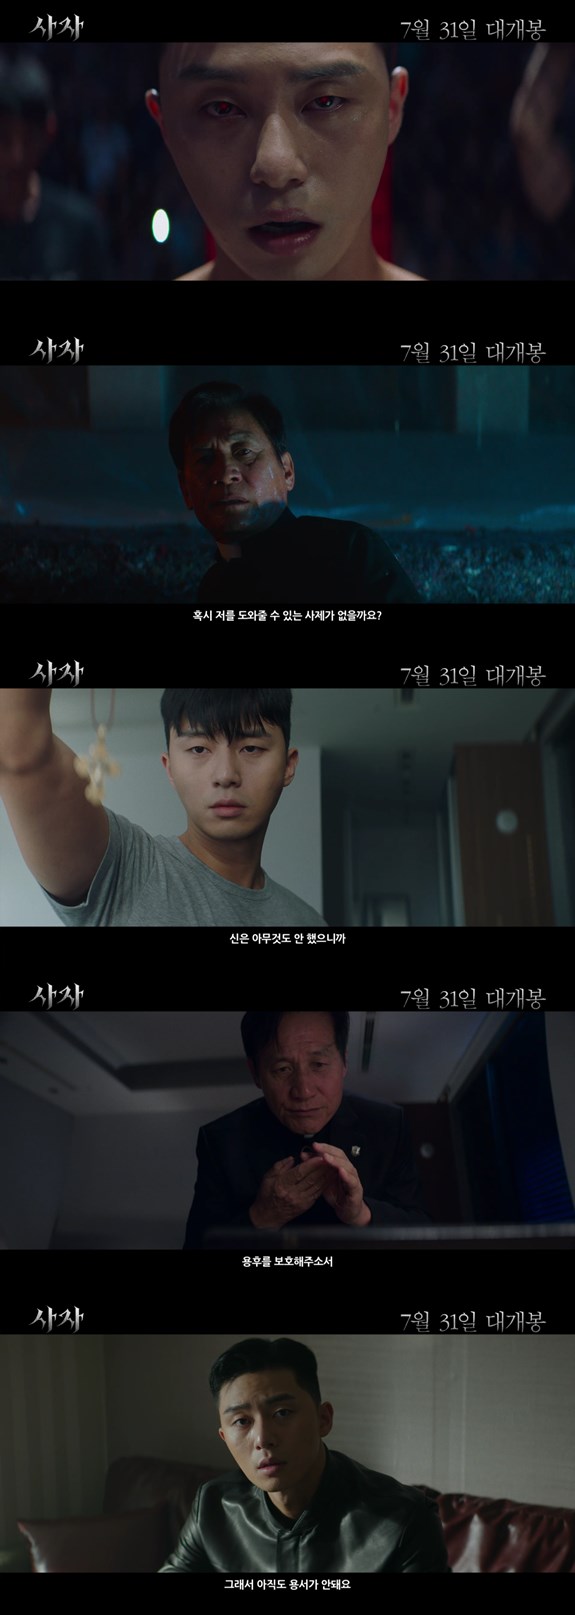 Lion is a film about the story of martial arts champion Park Seo-joon meeting the Kuma priest Ahn Sung-ki and confronting the powerful evil (), which has confused the world.Park Seo-joon, Ahn Sung-ki, and Woo Do-hwan have added a combination of Korean national actor and young blood, and the anticipated movie Lion released the third poster with intense visual and explosive tension.Park Seo-joon, a martial arts champion who faces evil, raises questions about the exciting development and powerful action in the movie with his face and charismatic eyes that have left behind the wound.Ahn Sung-ki, who is divided into a priest s safe lady who pursues evil with all his strong beliefs and good will, overwhelms his gaze with a heavy presence that feels his age.The 2019 best-anticipated film Lion, which adds fresh stories and new materials surrounding powerful evil, differentiated action and a combination of attractive actors to the Sights, is scheduled to open on July 31.